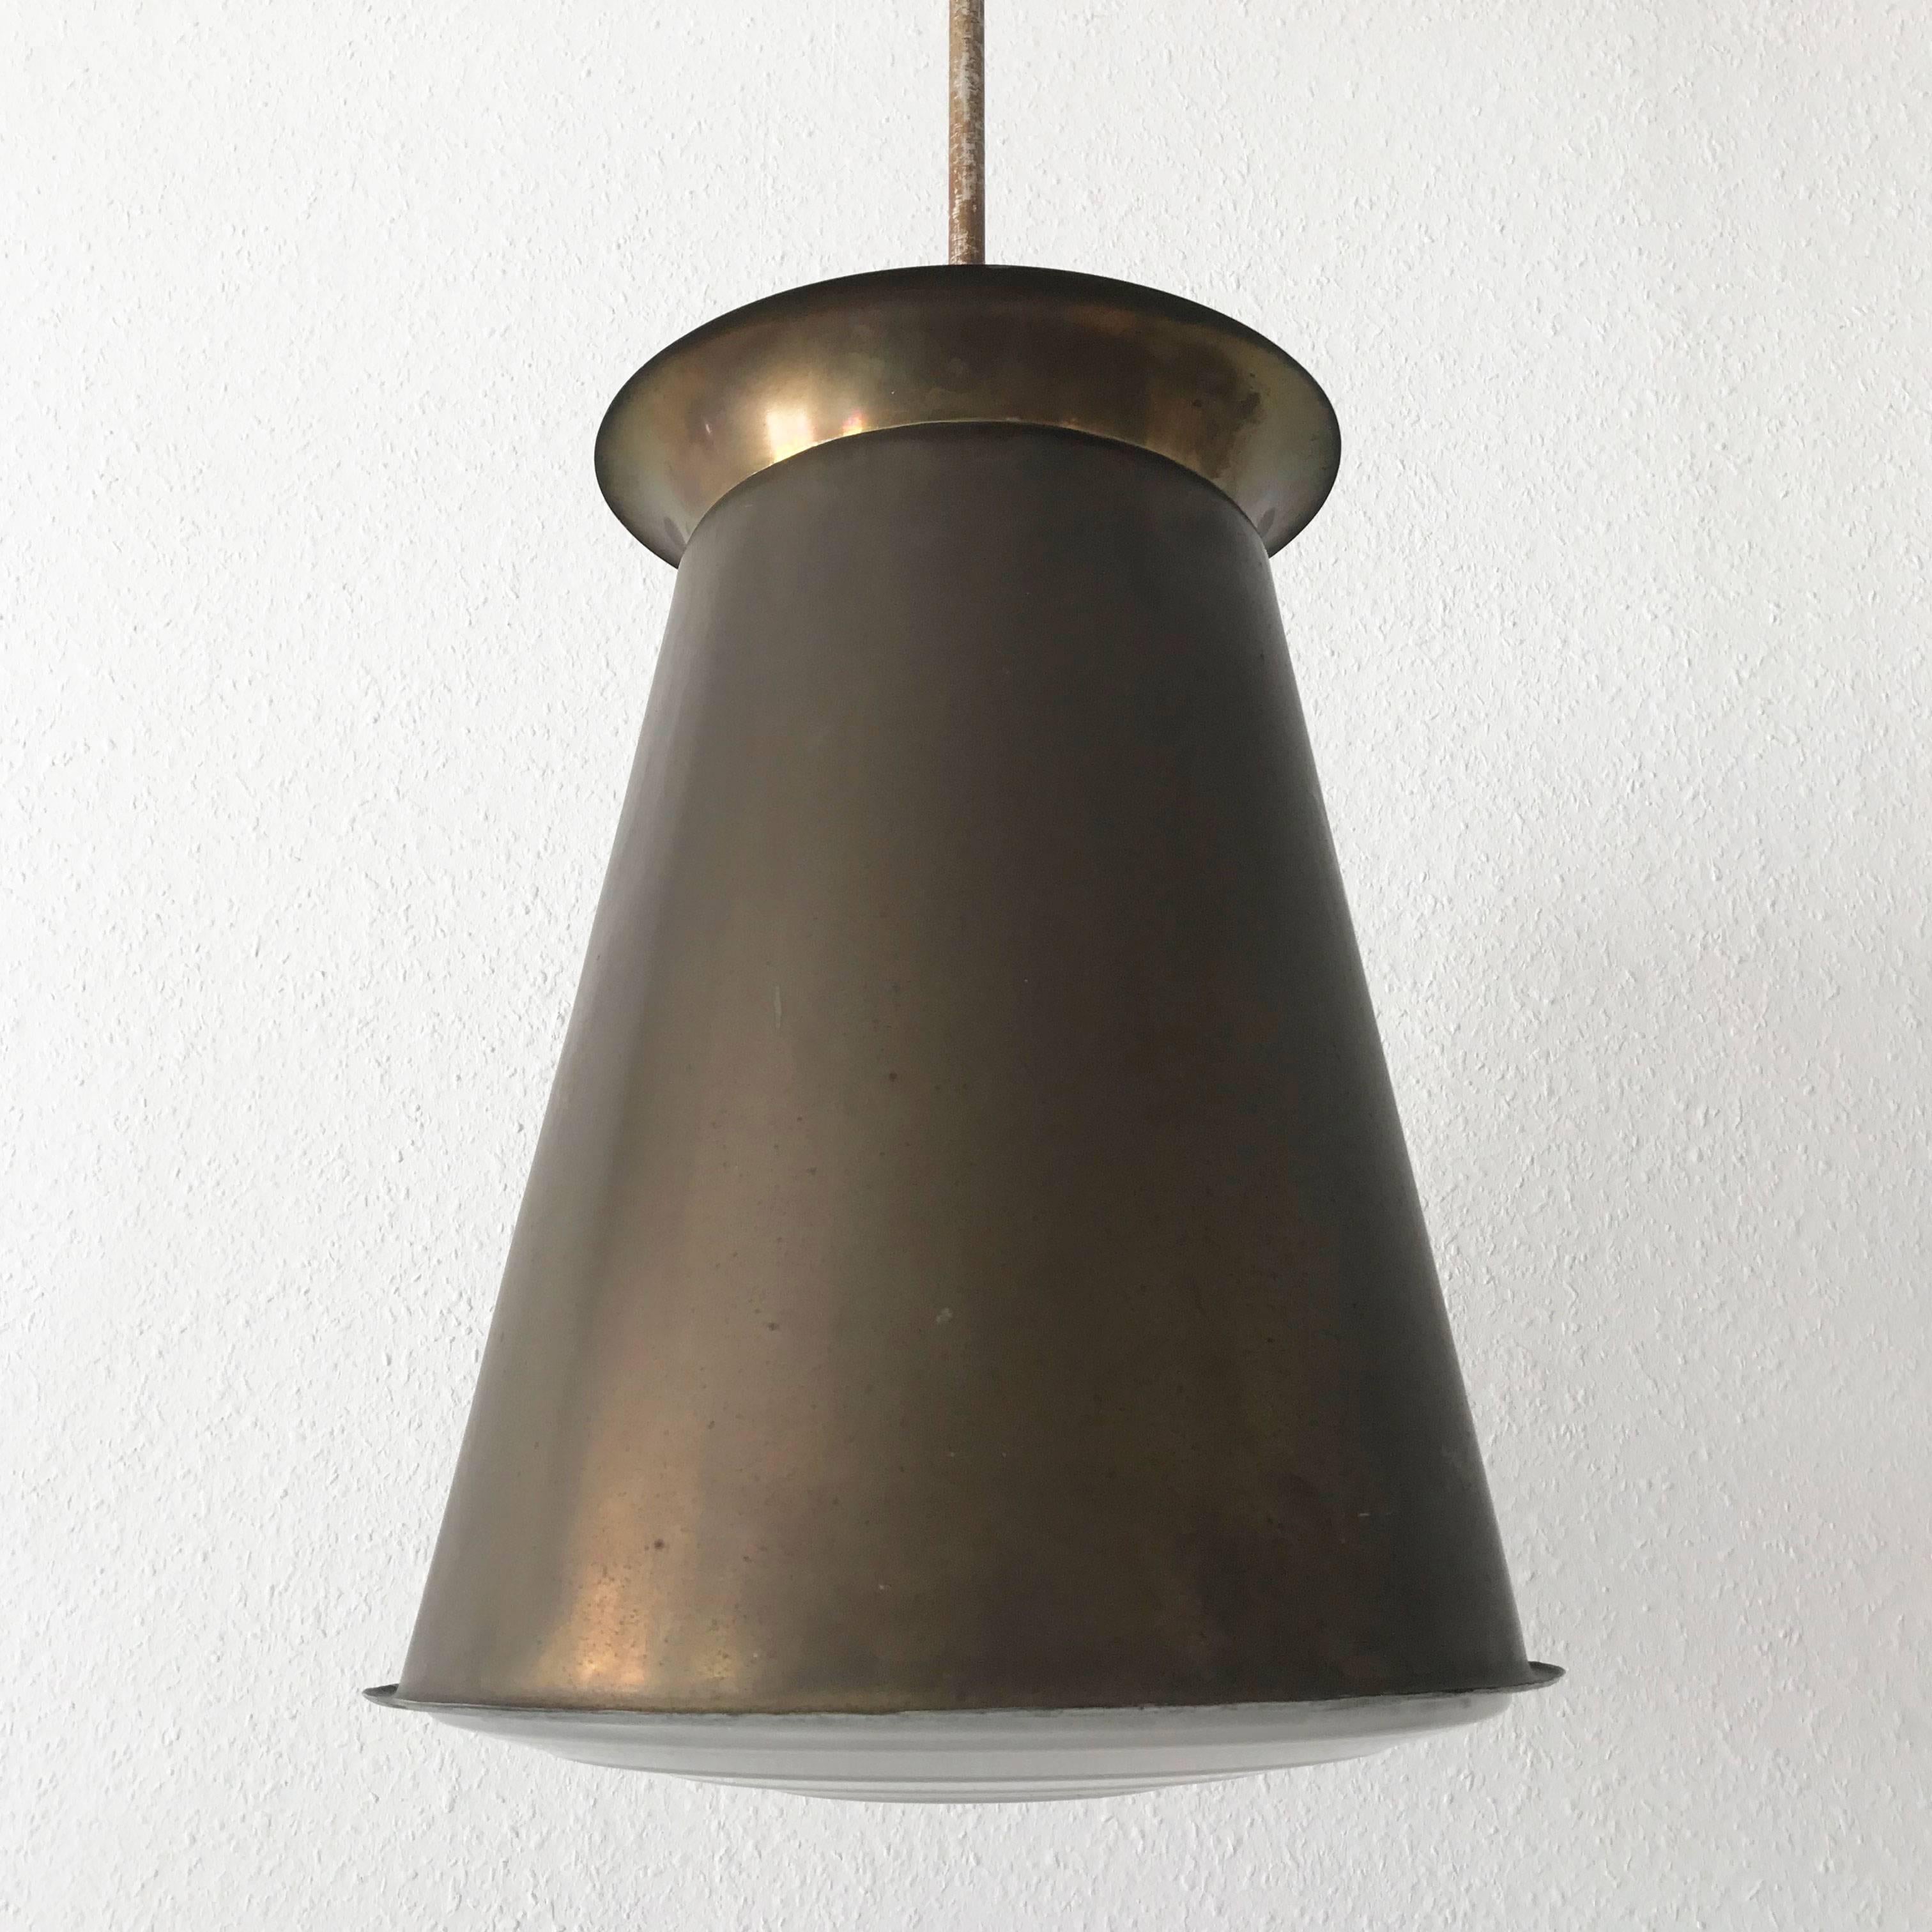 Exceptional Bauhaus Pendant Lamp by Adolf Meyer for Zeiss Ikon, 1930s, Germany For Sale 2